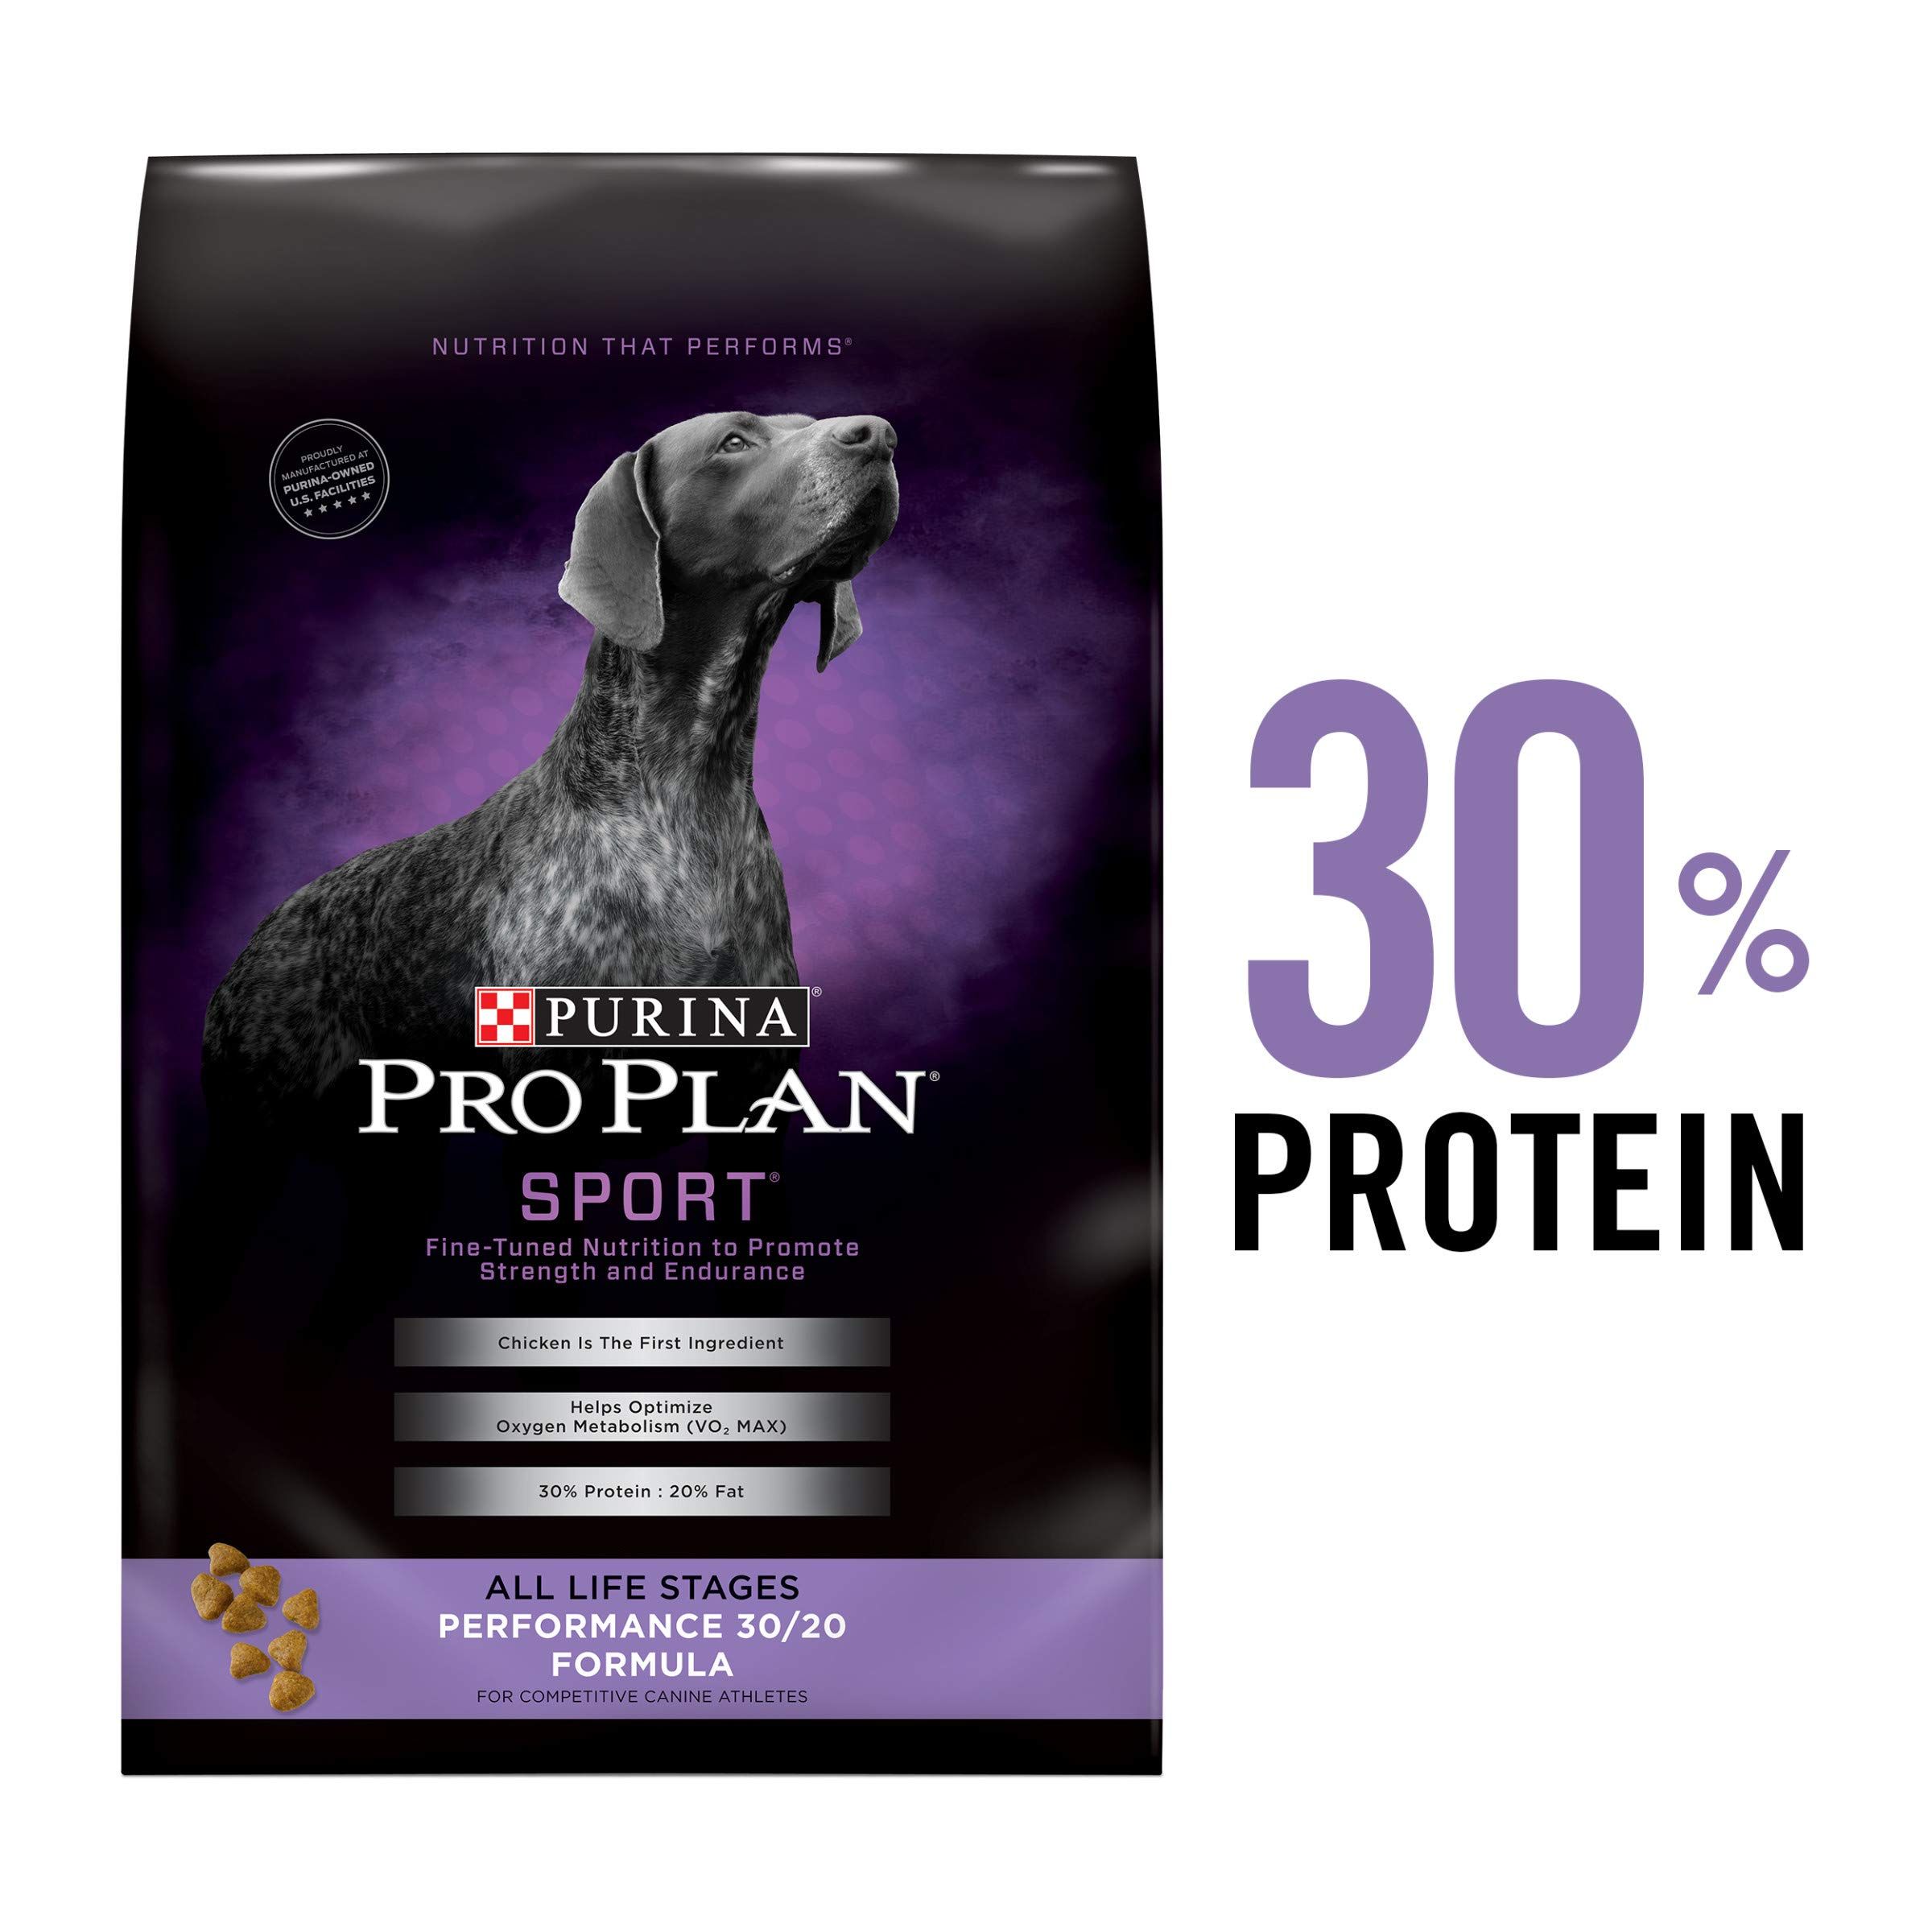 26 HQ Photos Purina Pro Plan Puppy Review : Purina Pro Plan Dog Food ...